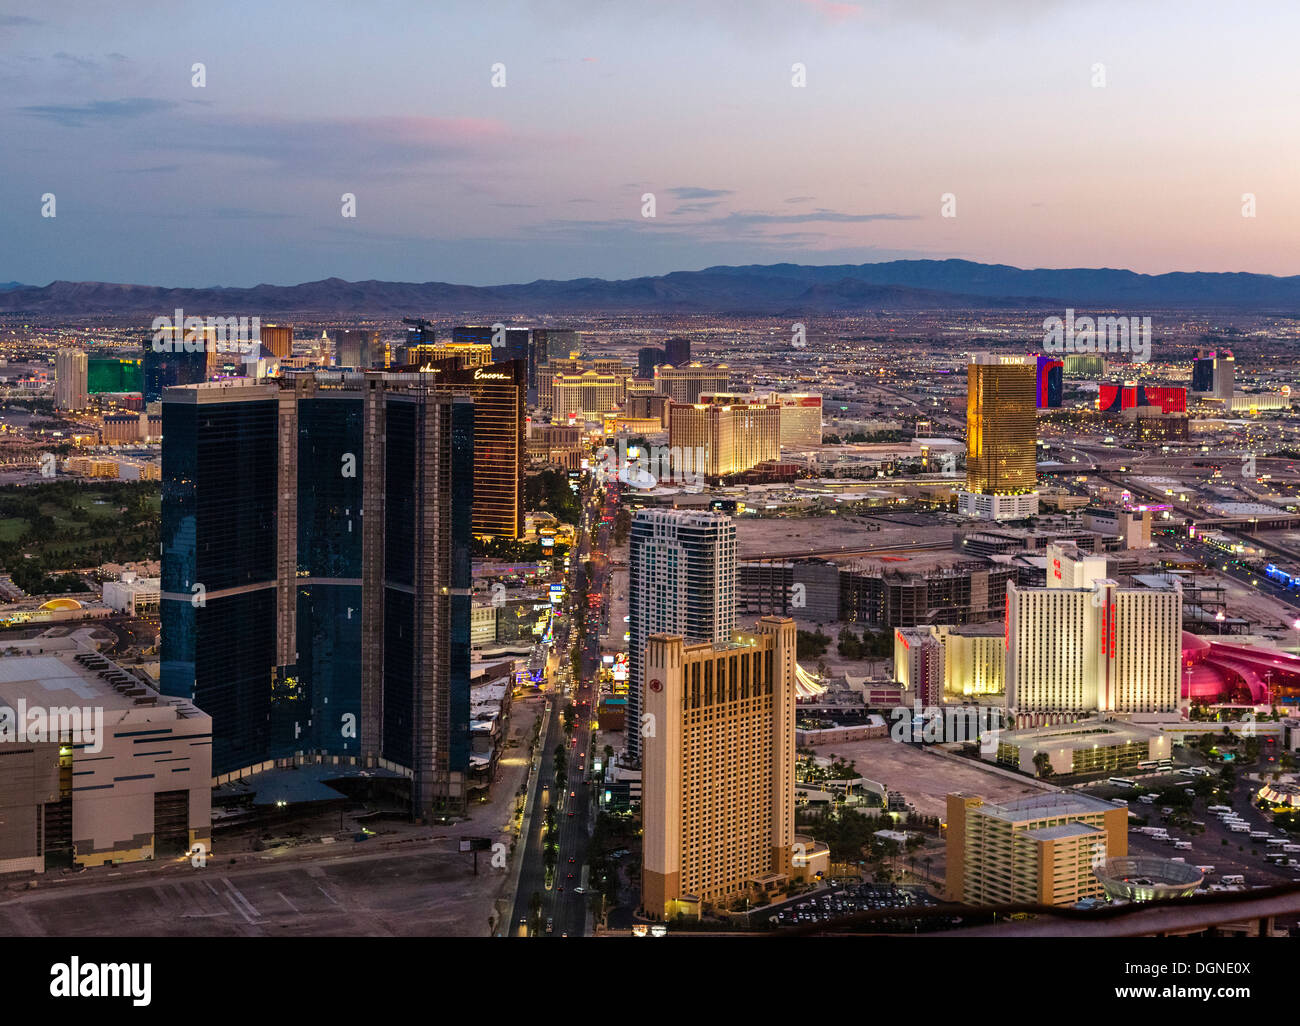 View of South Las Vegas Boulevard  (The Strip) at dusk from the top of the Stratosphere tower, Las Vegas, Nevada, USA Stock Photo